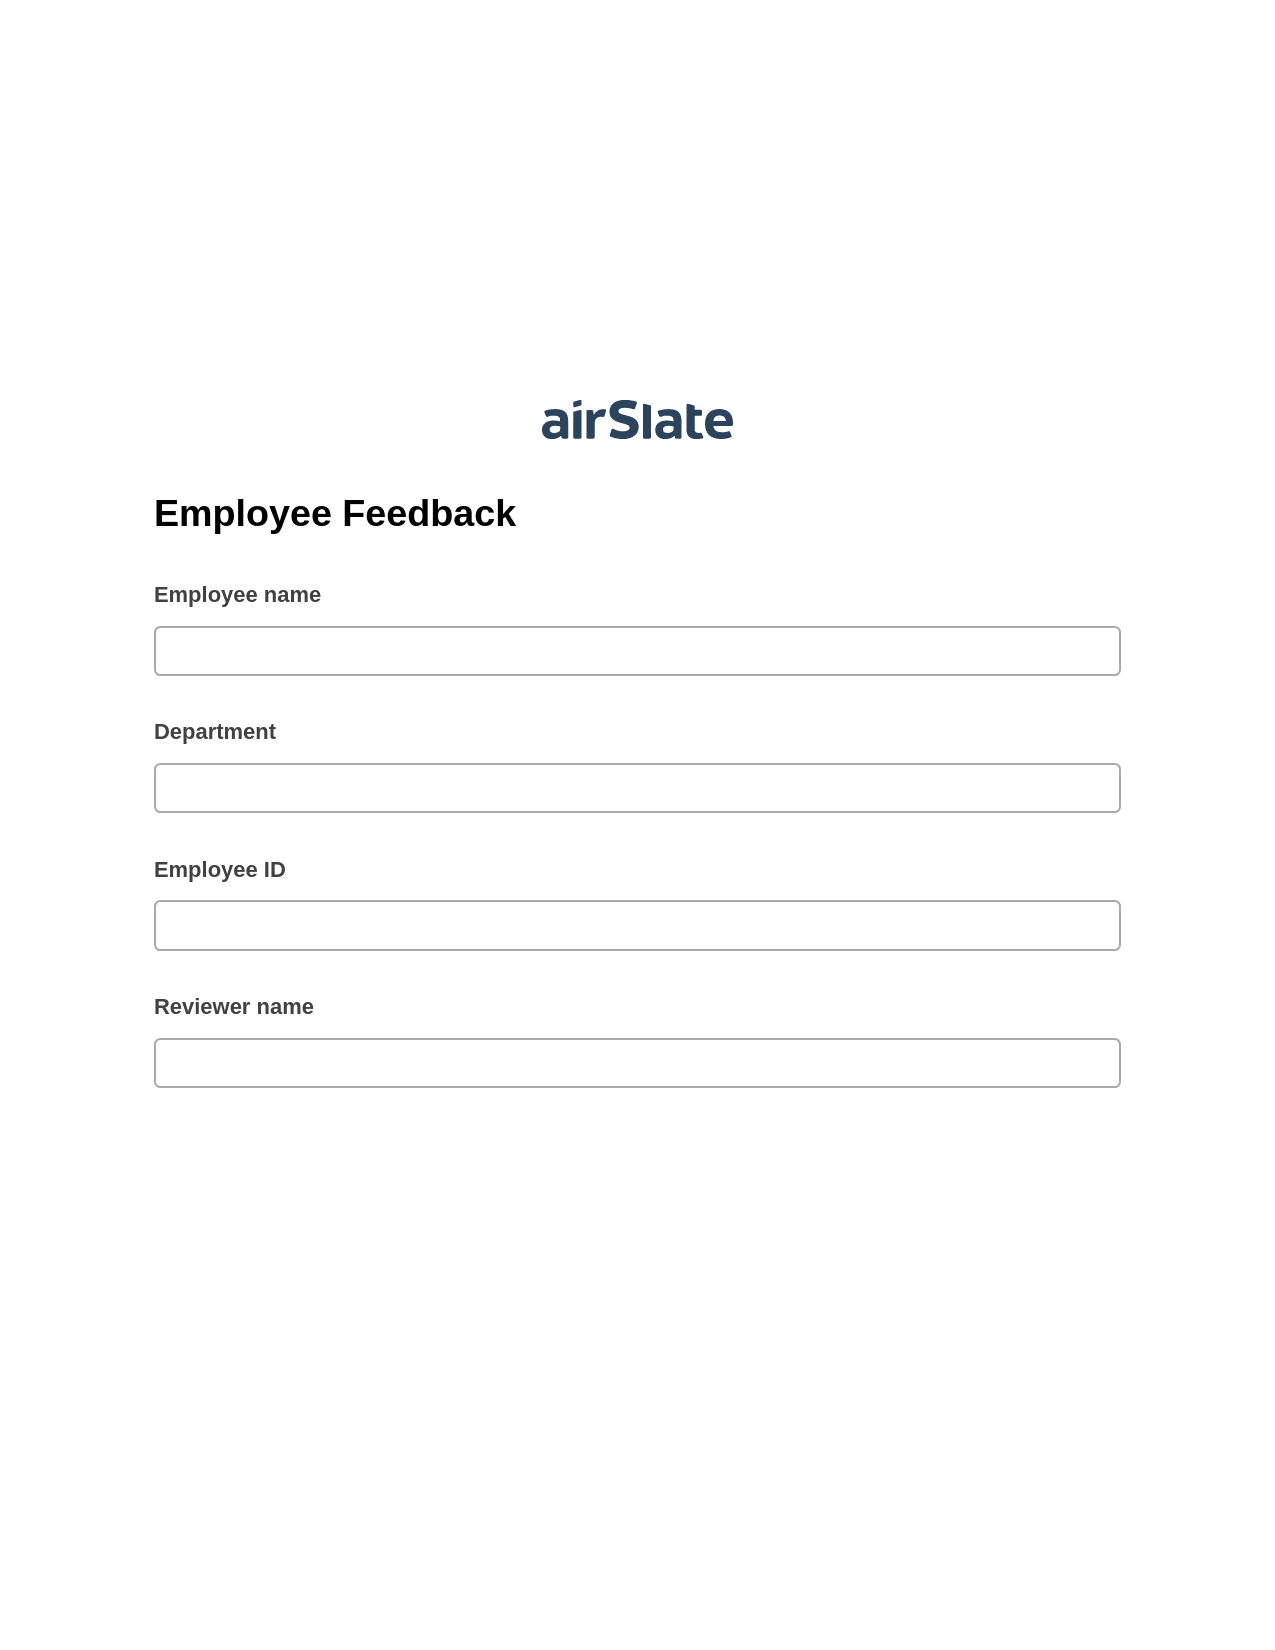 Multirole Employee Feedback Pre-fill from Salesforce Record Bot, Unassign Role Bot, Export to Formstack Documents Bot